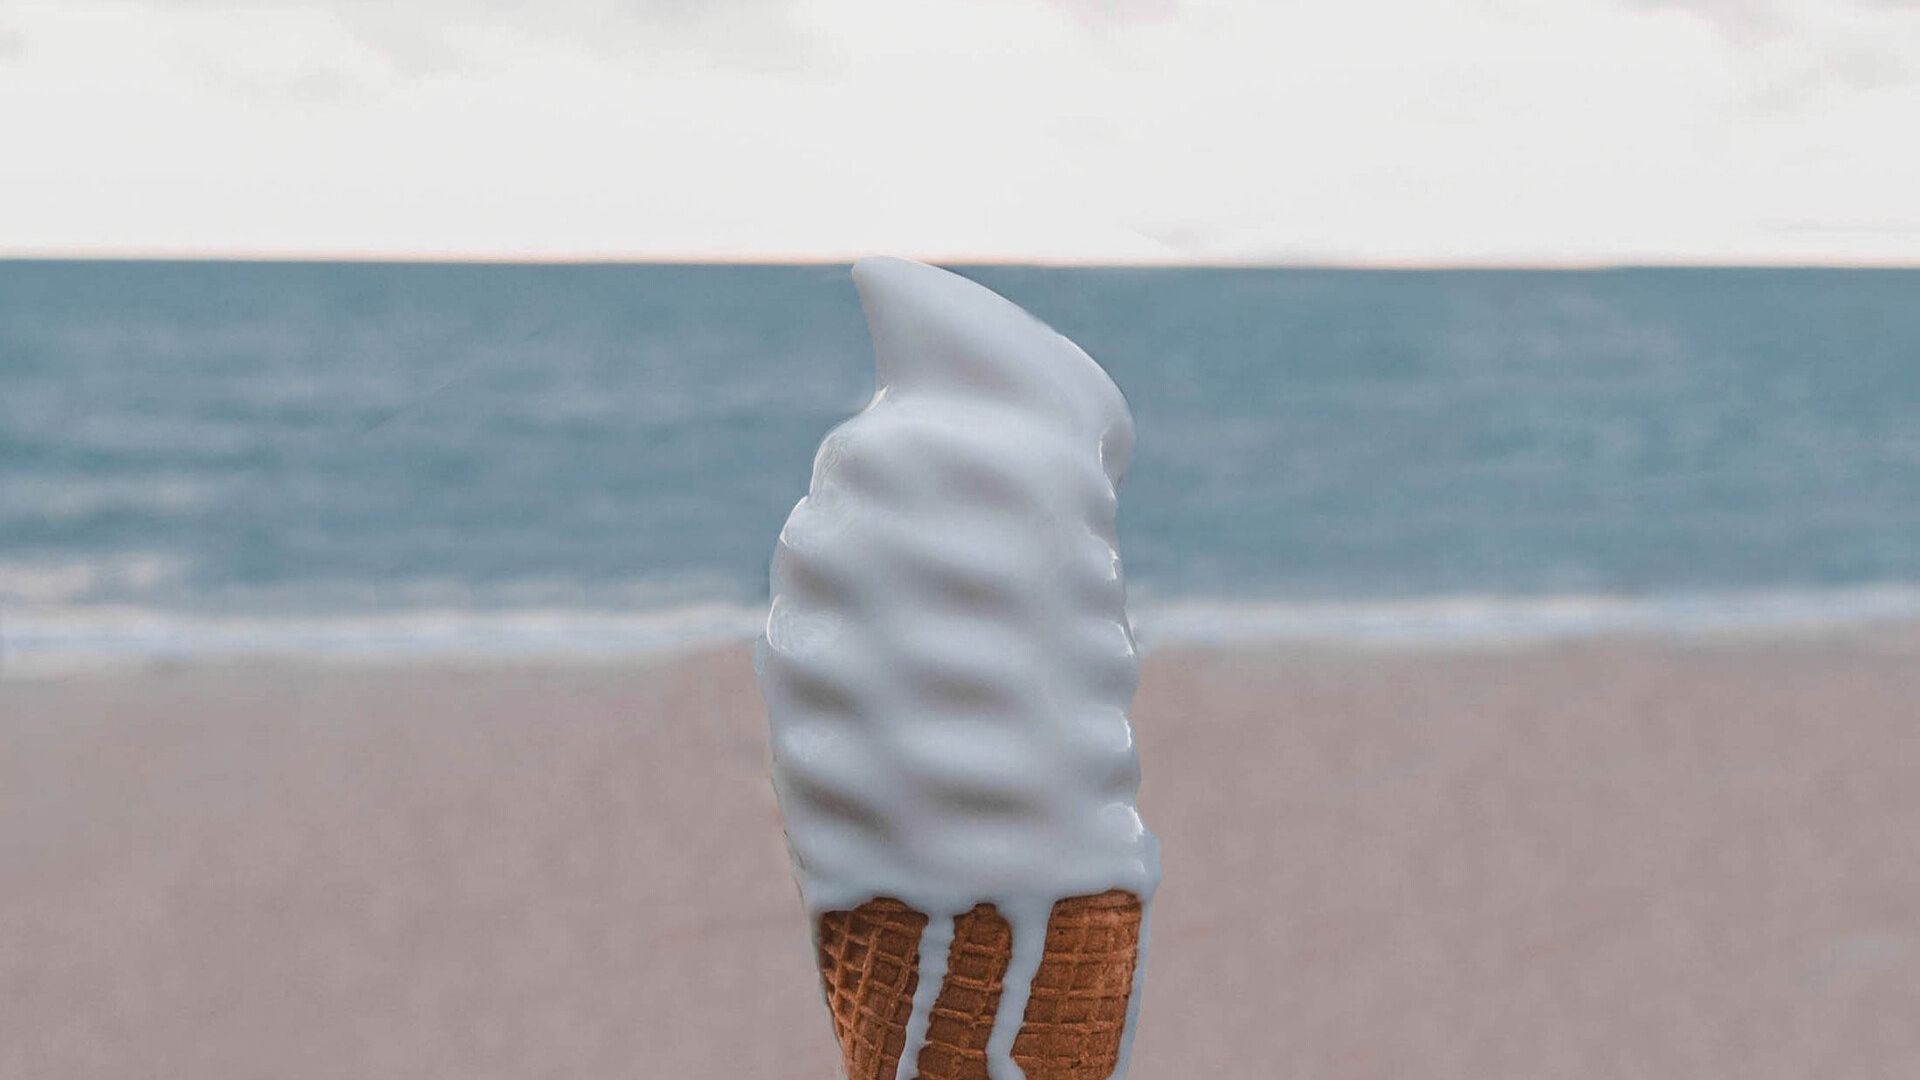 A close up of an ice cream cone on a beach with the ocean in the background.